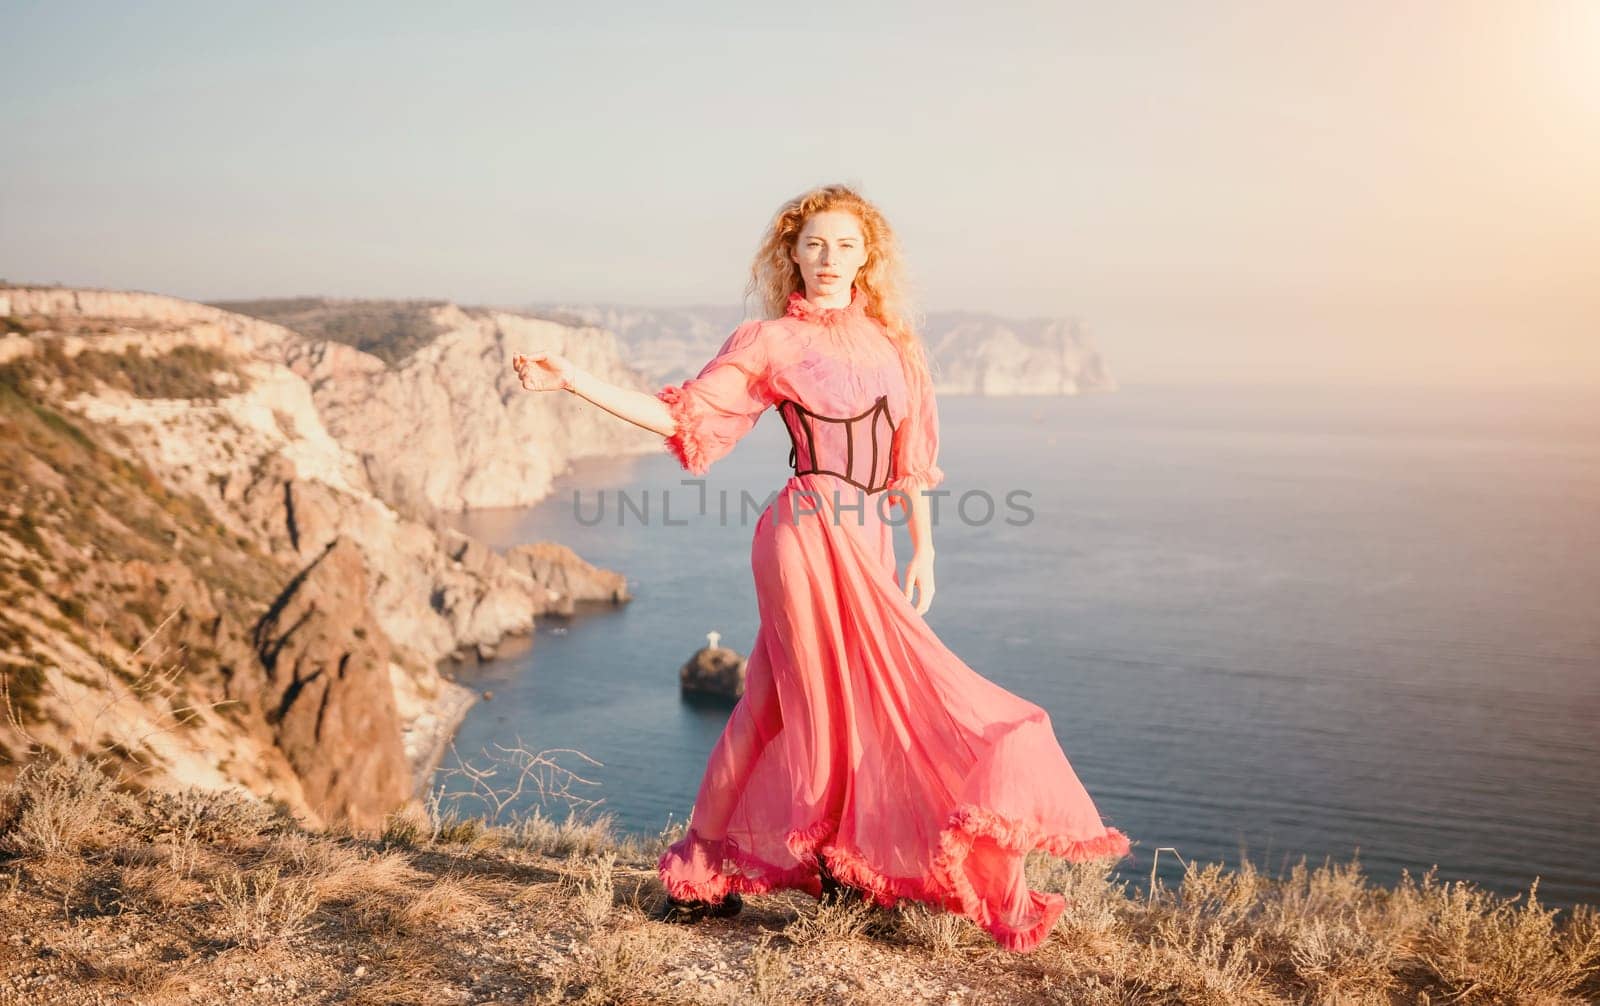 Curly redhead caucasian woman with freckles. Cute beautiful young blonde woman in a pink long dress posing on a volcanic rock high above the sea during sunset. Fashion travel conept by panophotograph